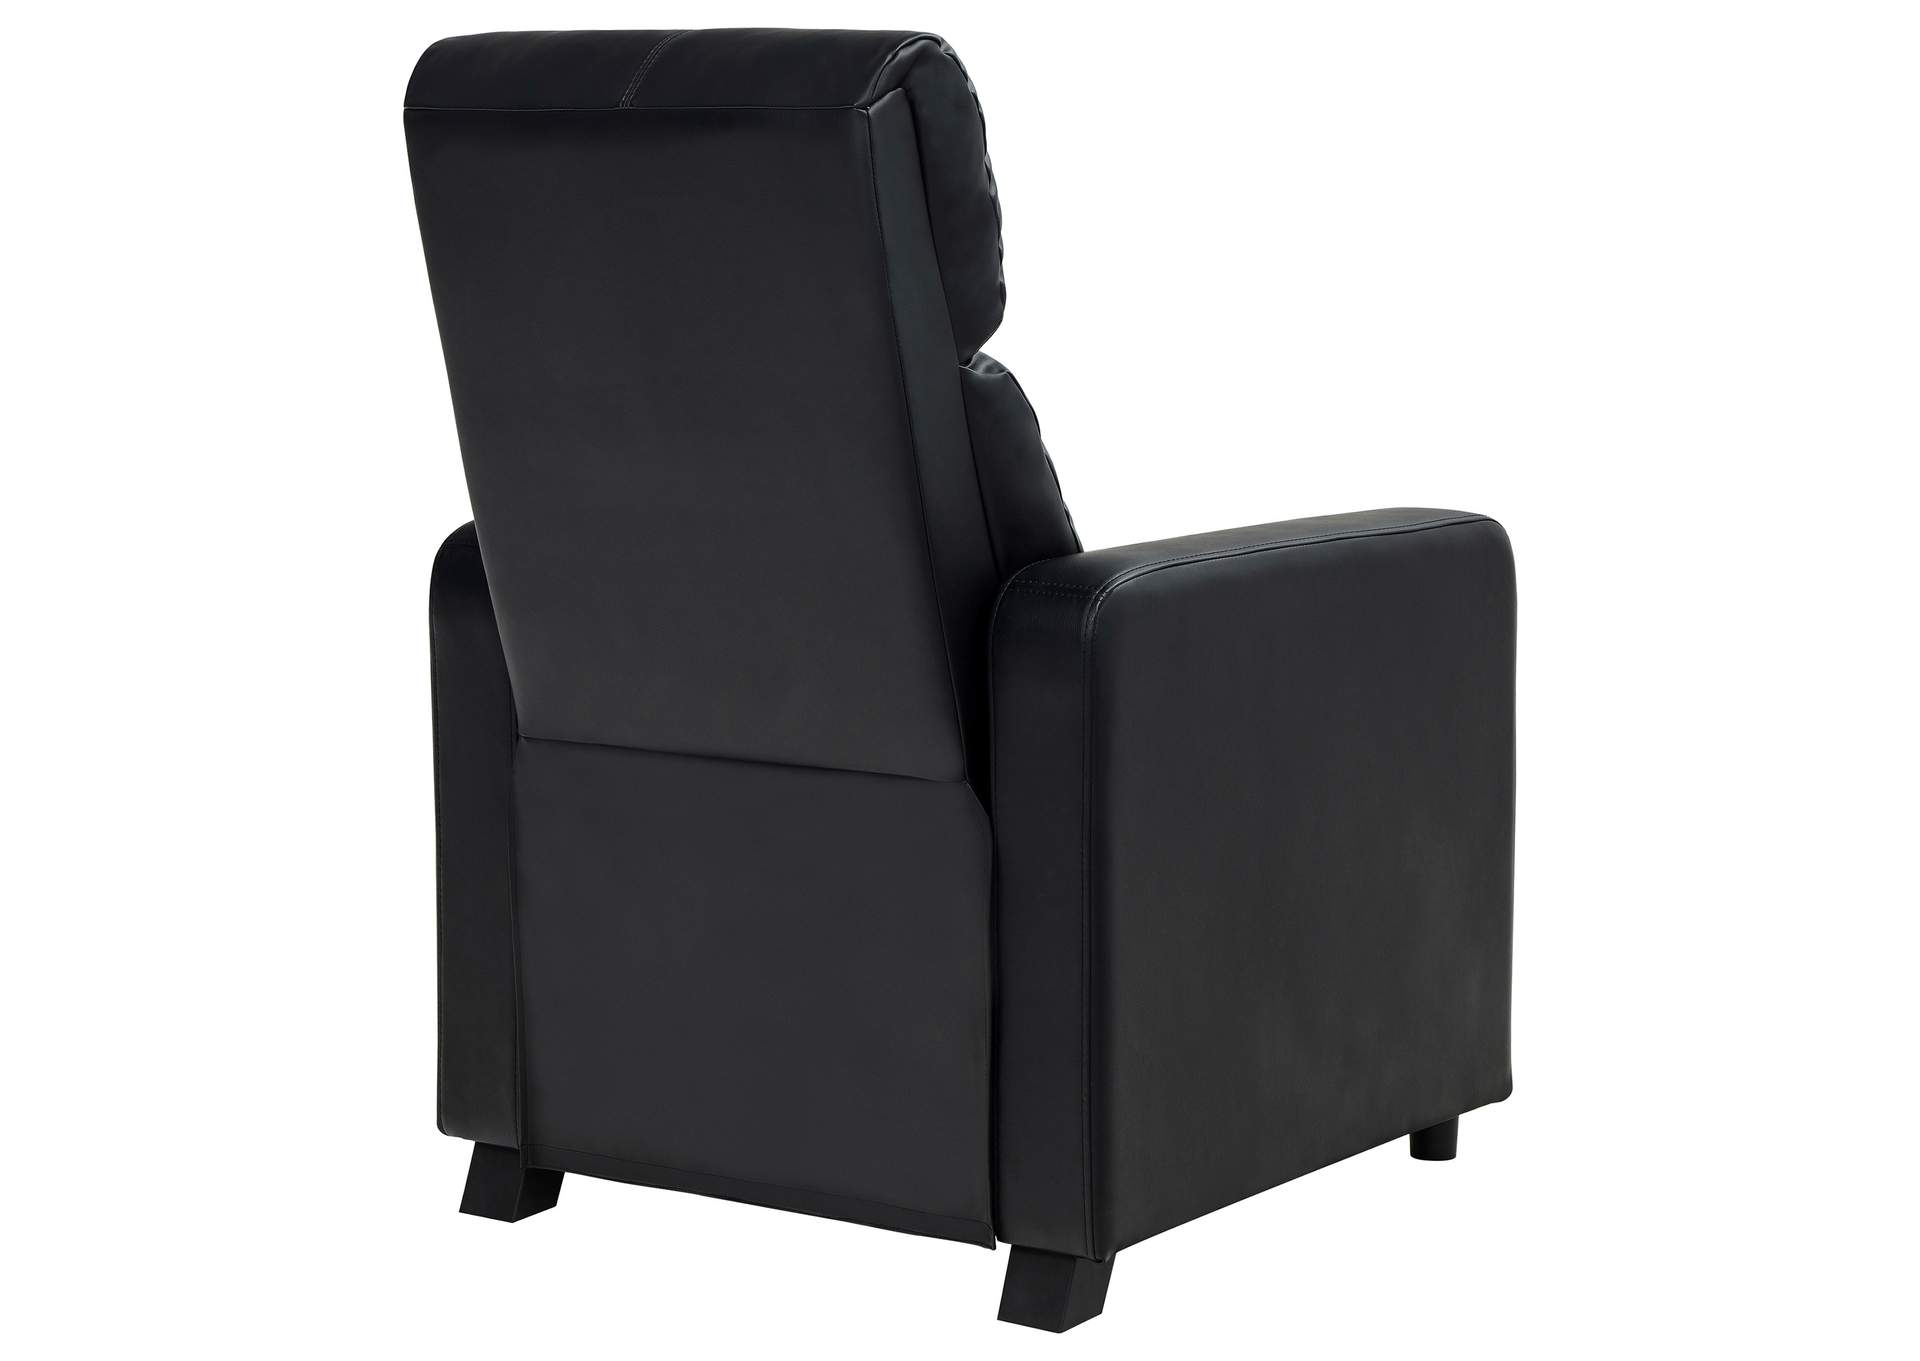 Toohey Home Theater Push Back Recliner Black,Coaster Furniture